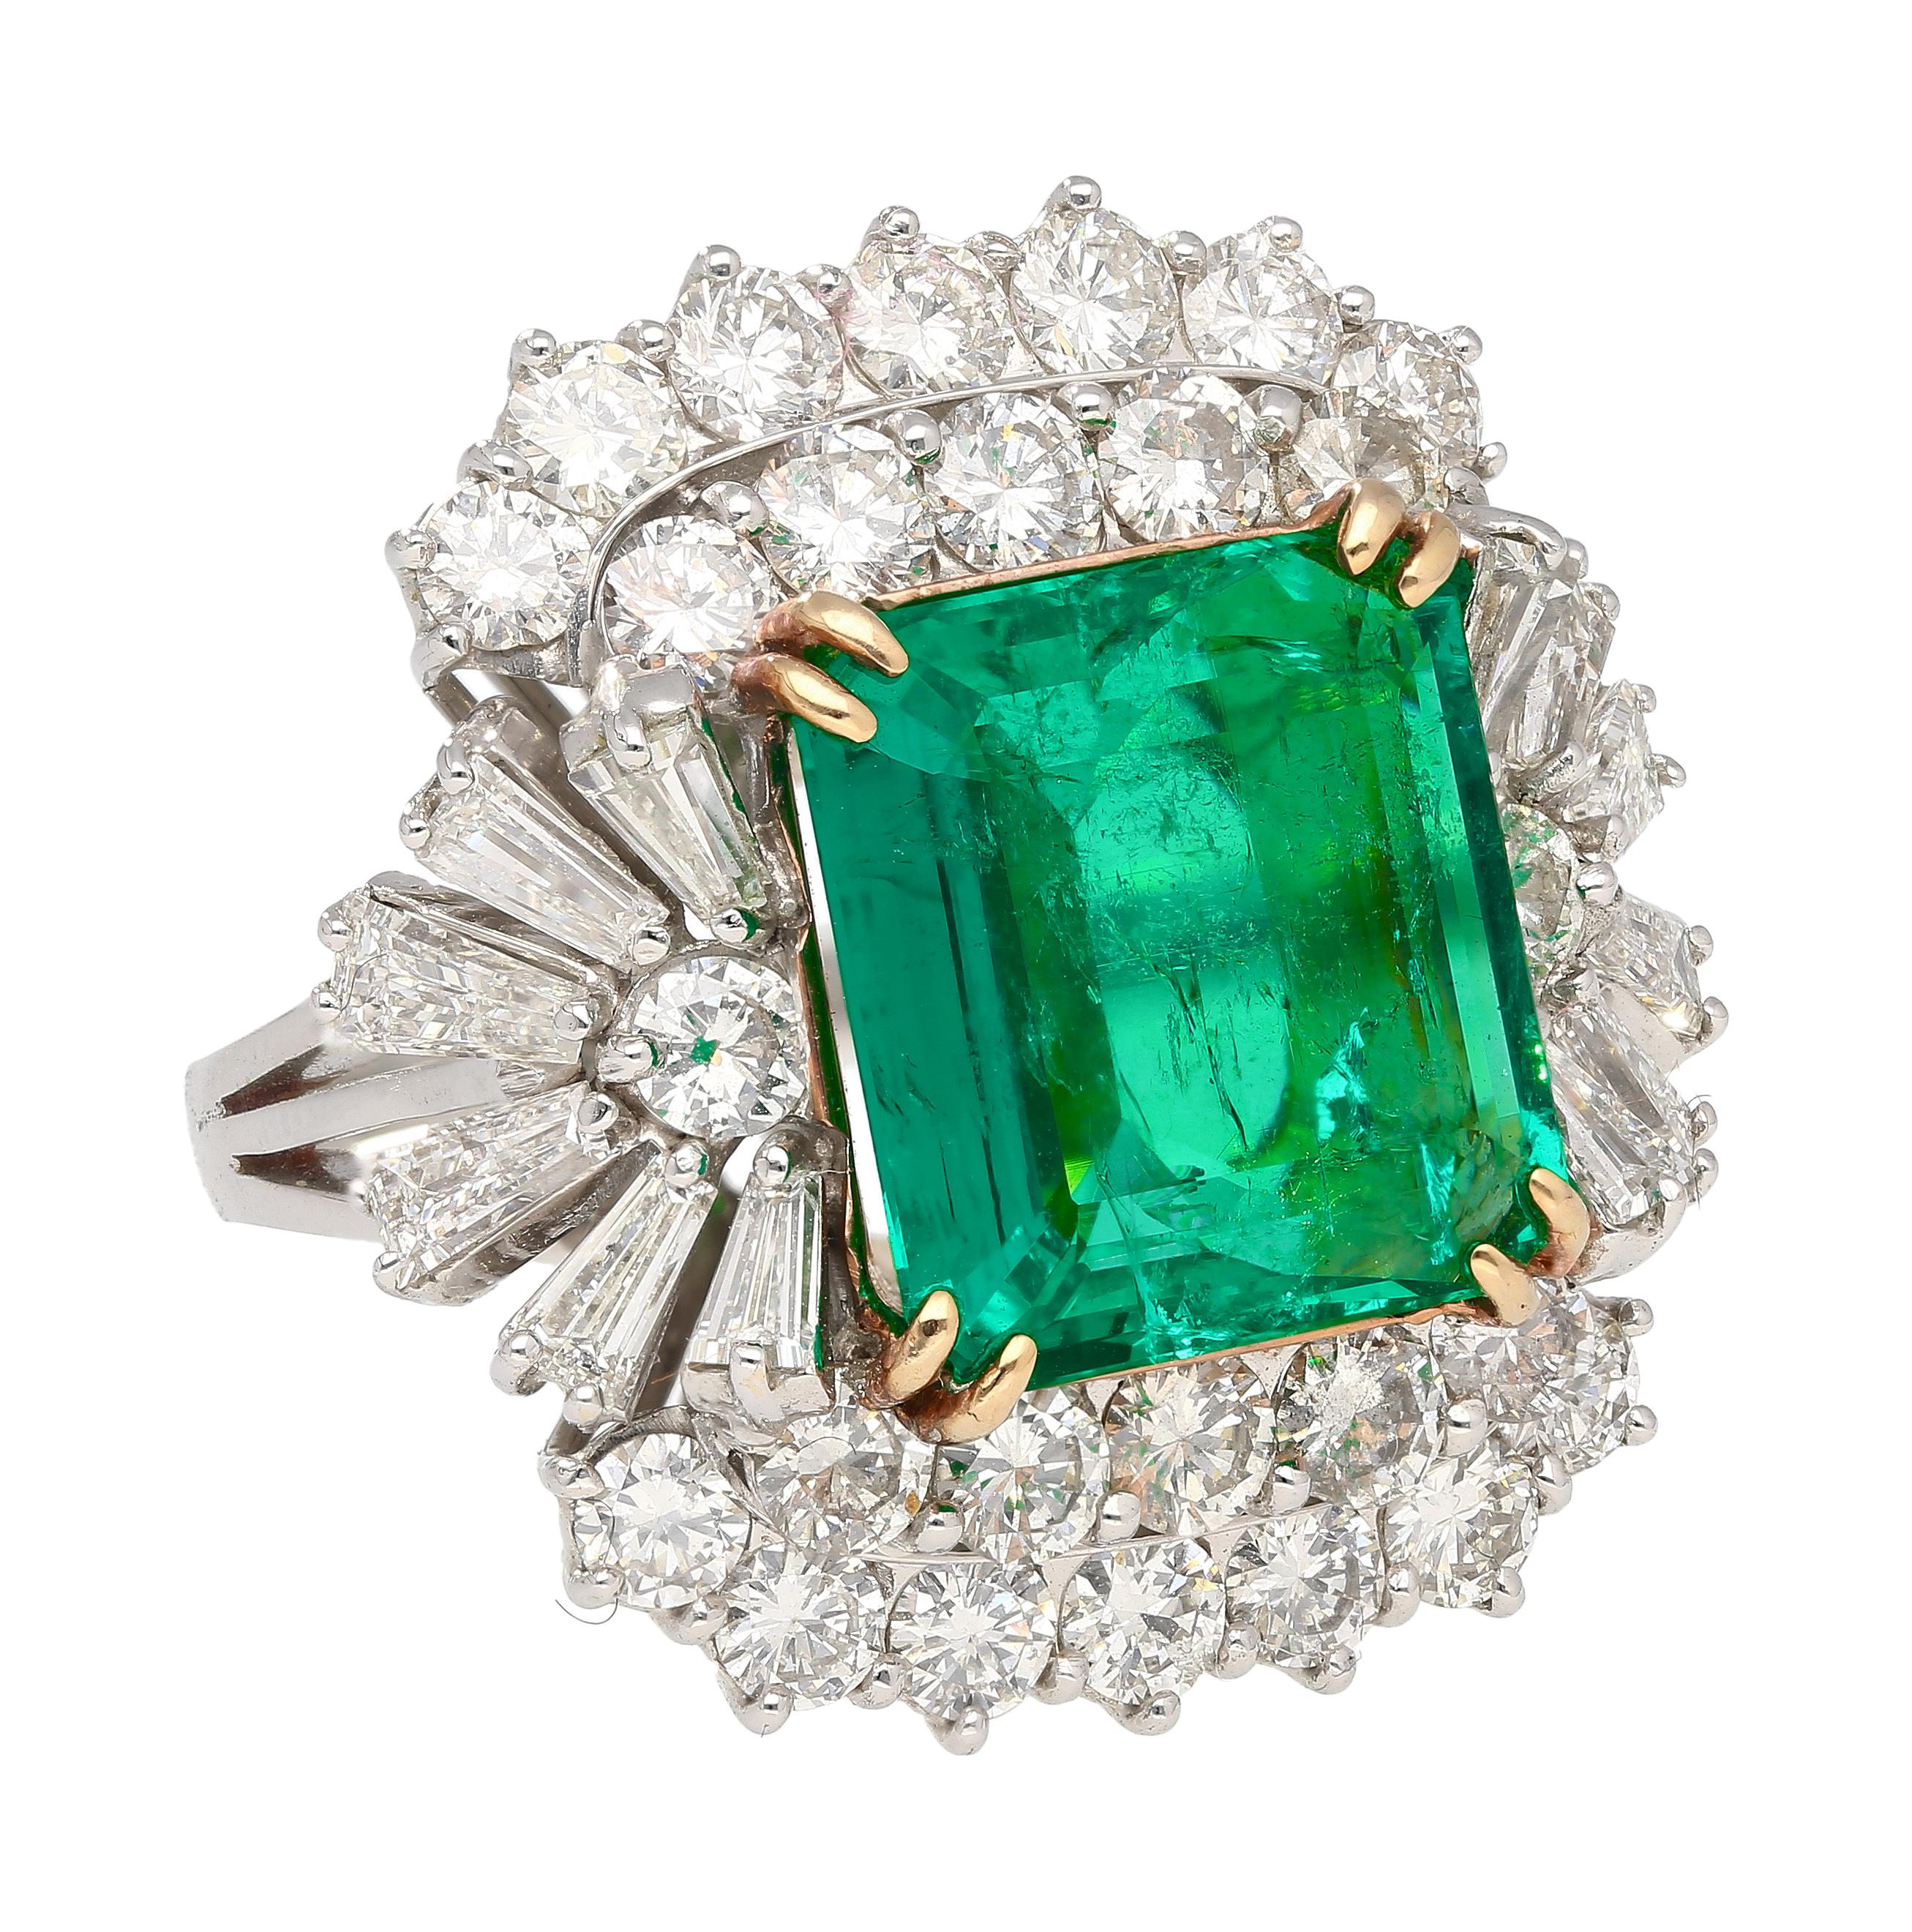 18K White and Yellow Gold two gold-toned emerald and Diamond Ring. A true masterpiece weighing 9.68 grams and 10.66 carats in natural mined gemstones. At its heart lies a captivating 6.26-carat emerald-cut Emerald, a gem of natural beauty with